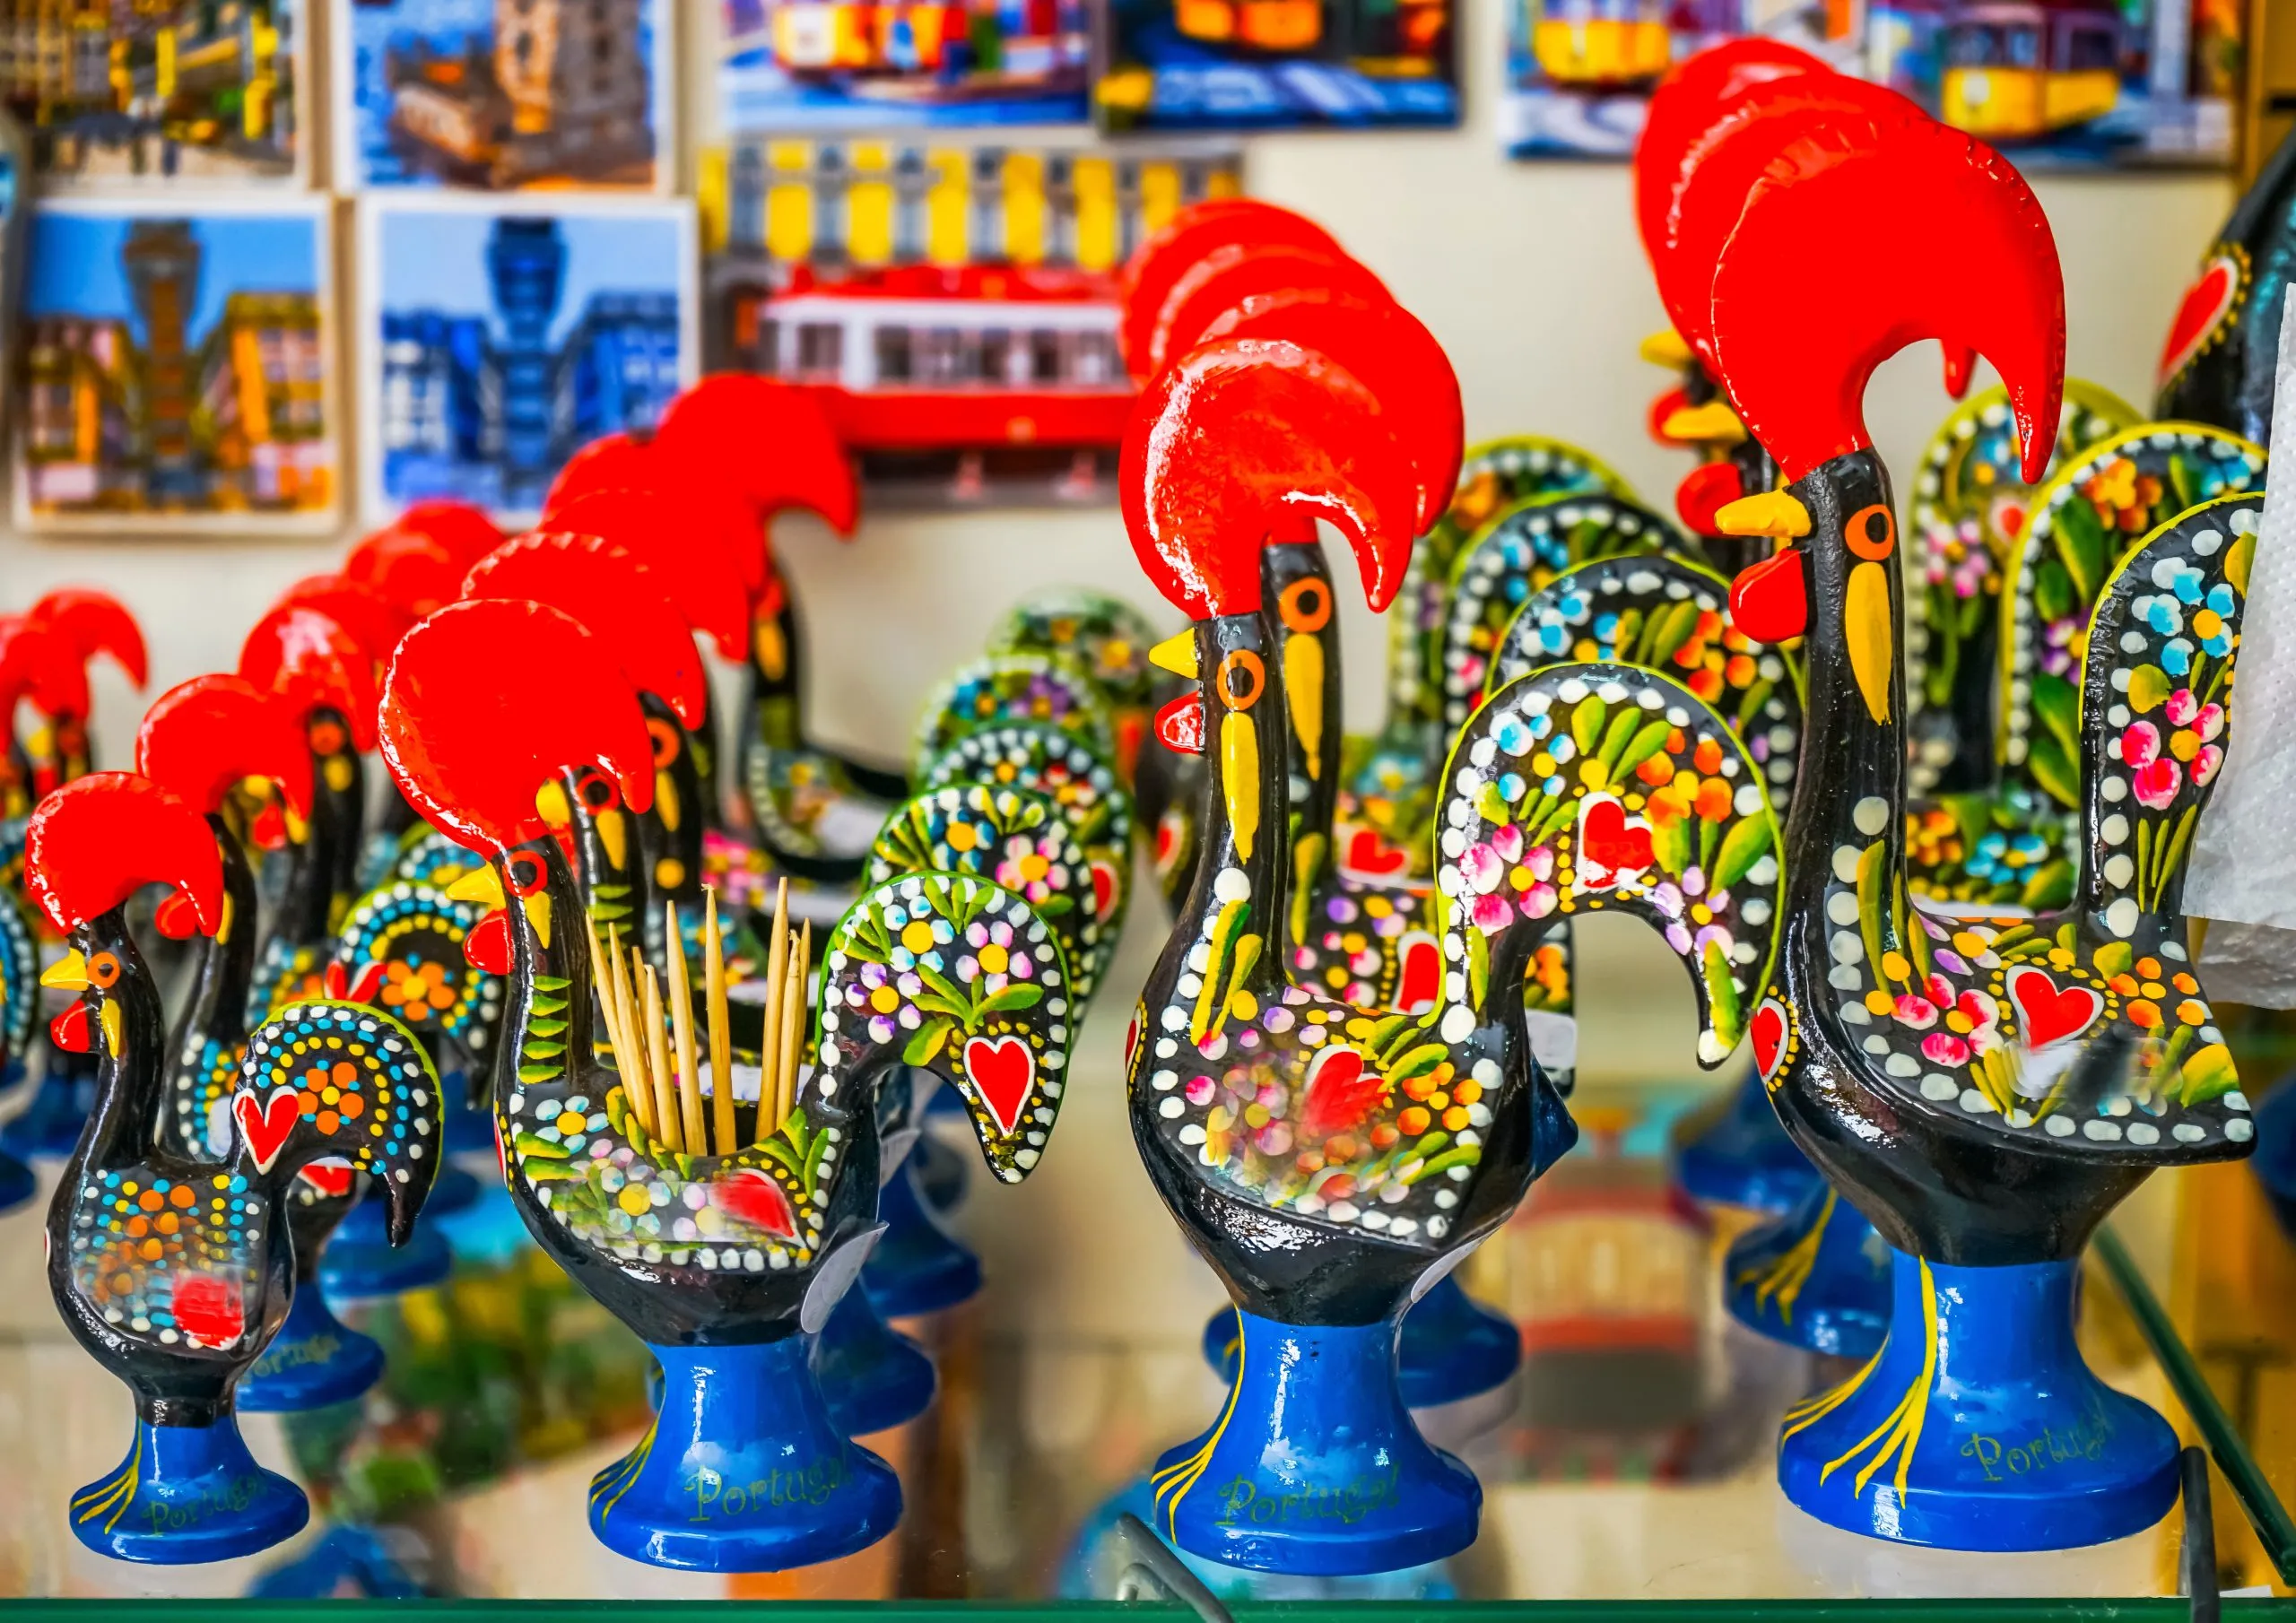 colorful barcelos roosters for sale, some of the best portugal souvenirs to buy